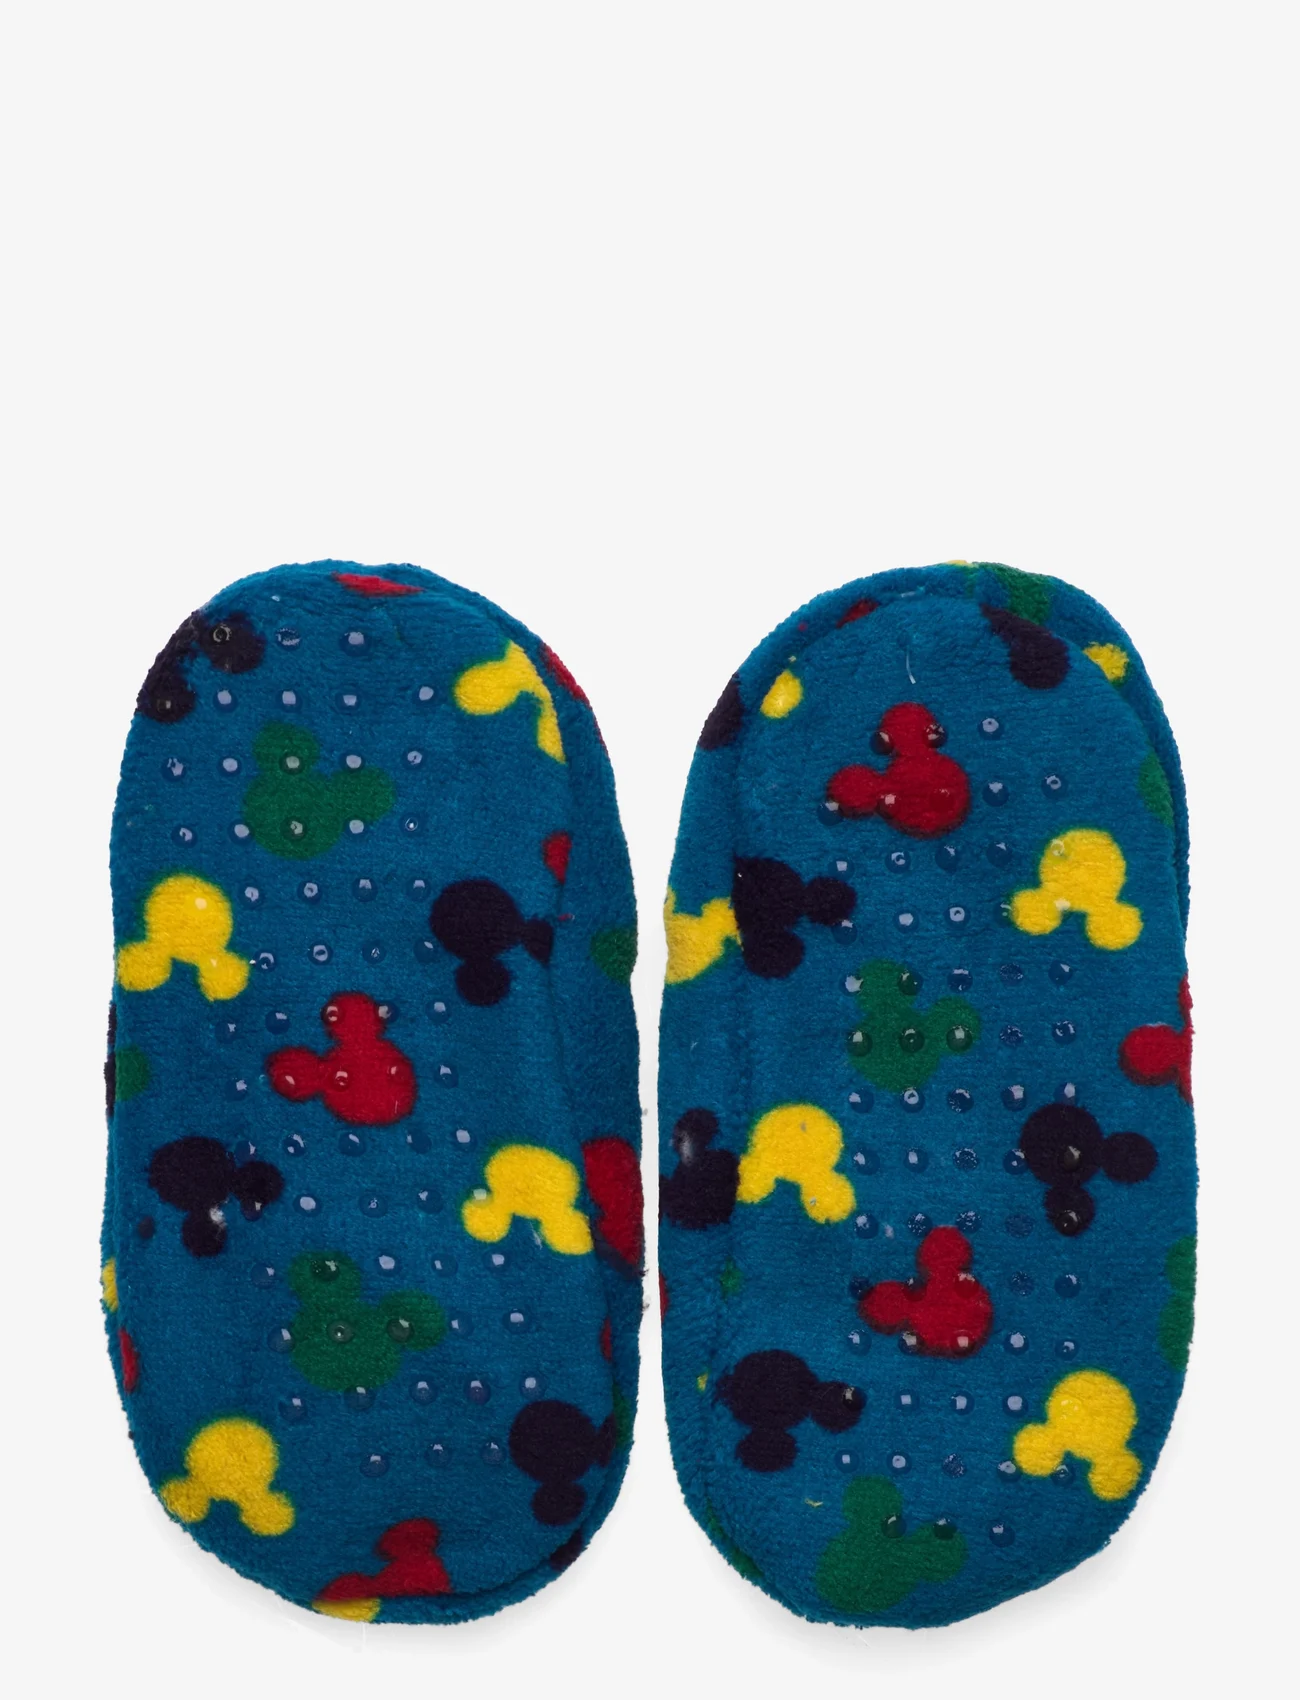 Mickey Mouse - SLIPPERS - instappers - blue - 1